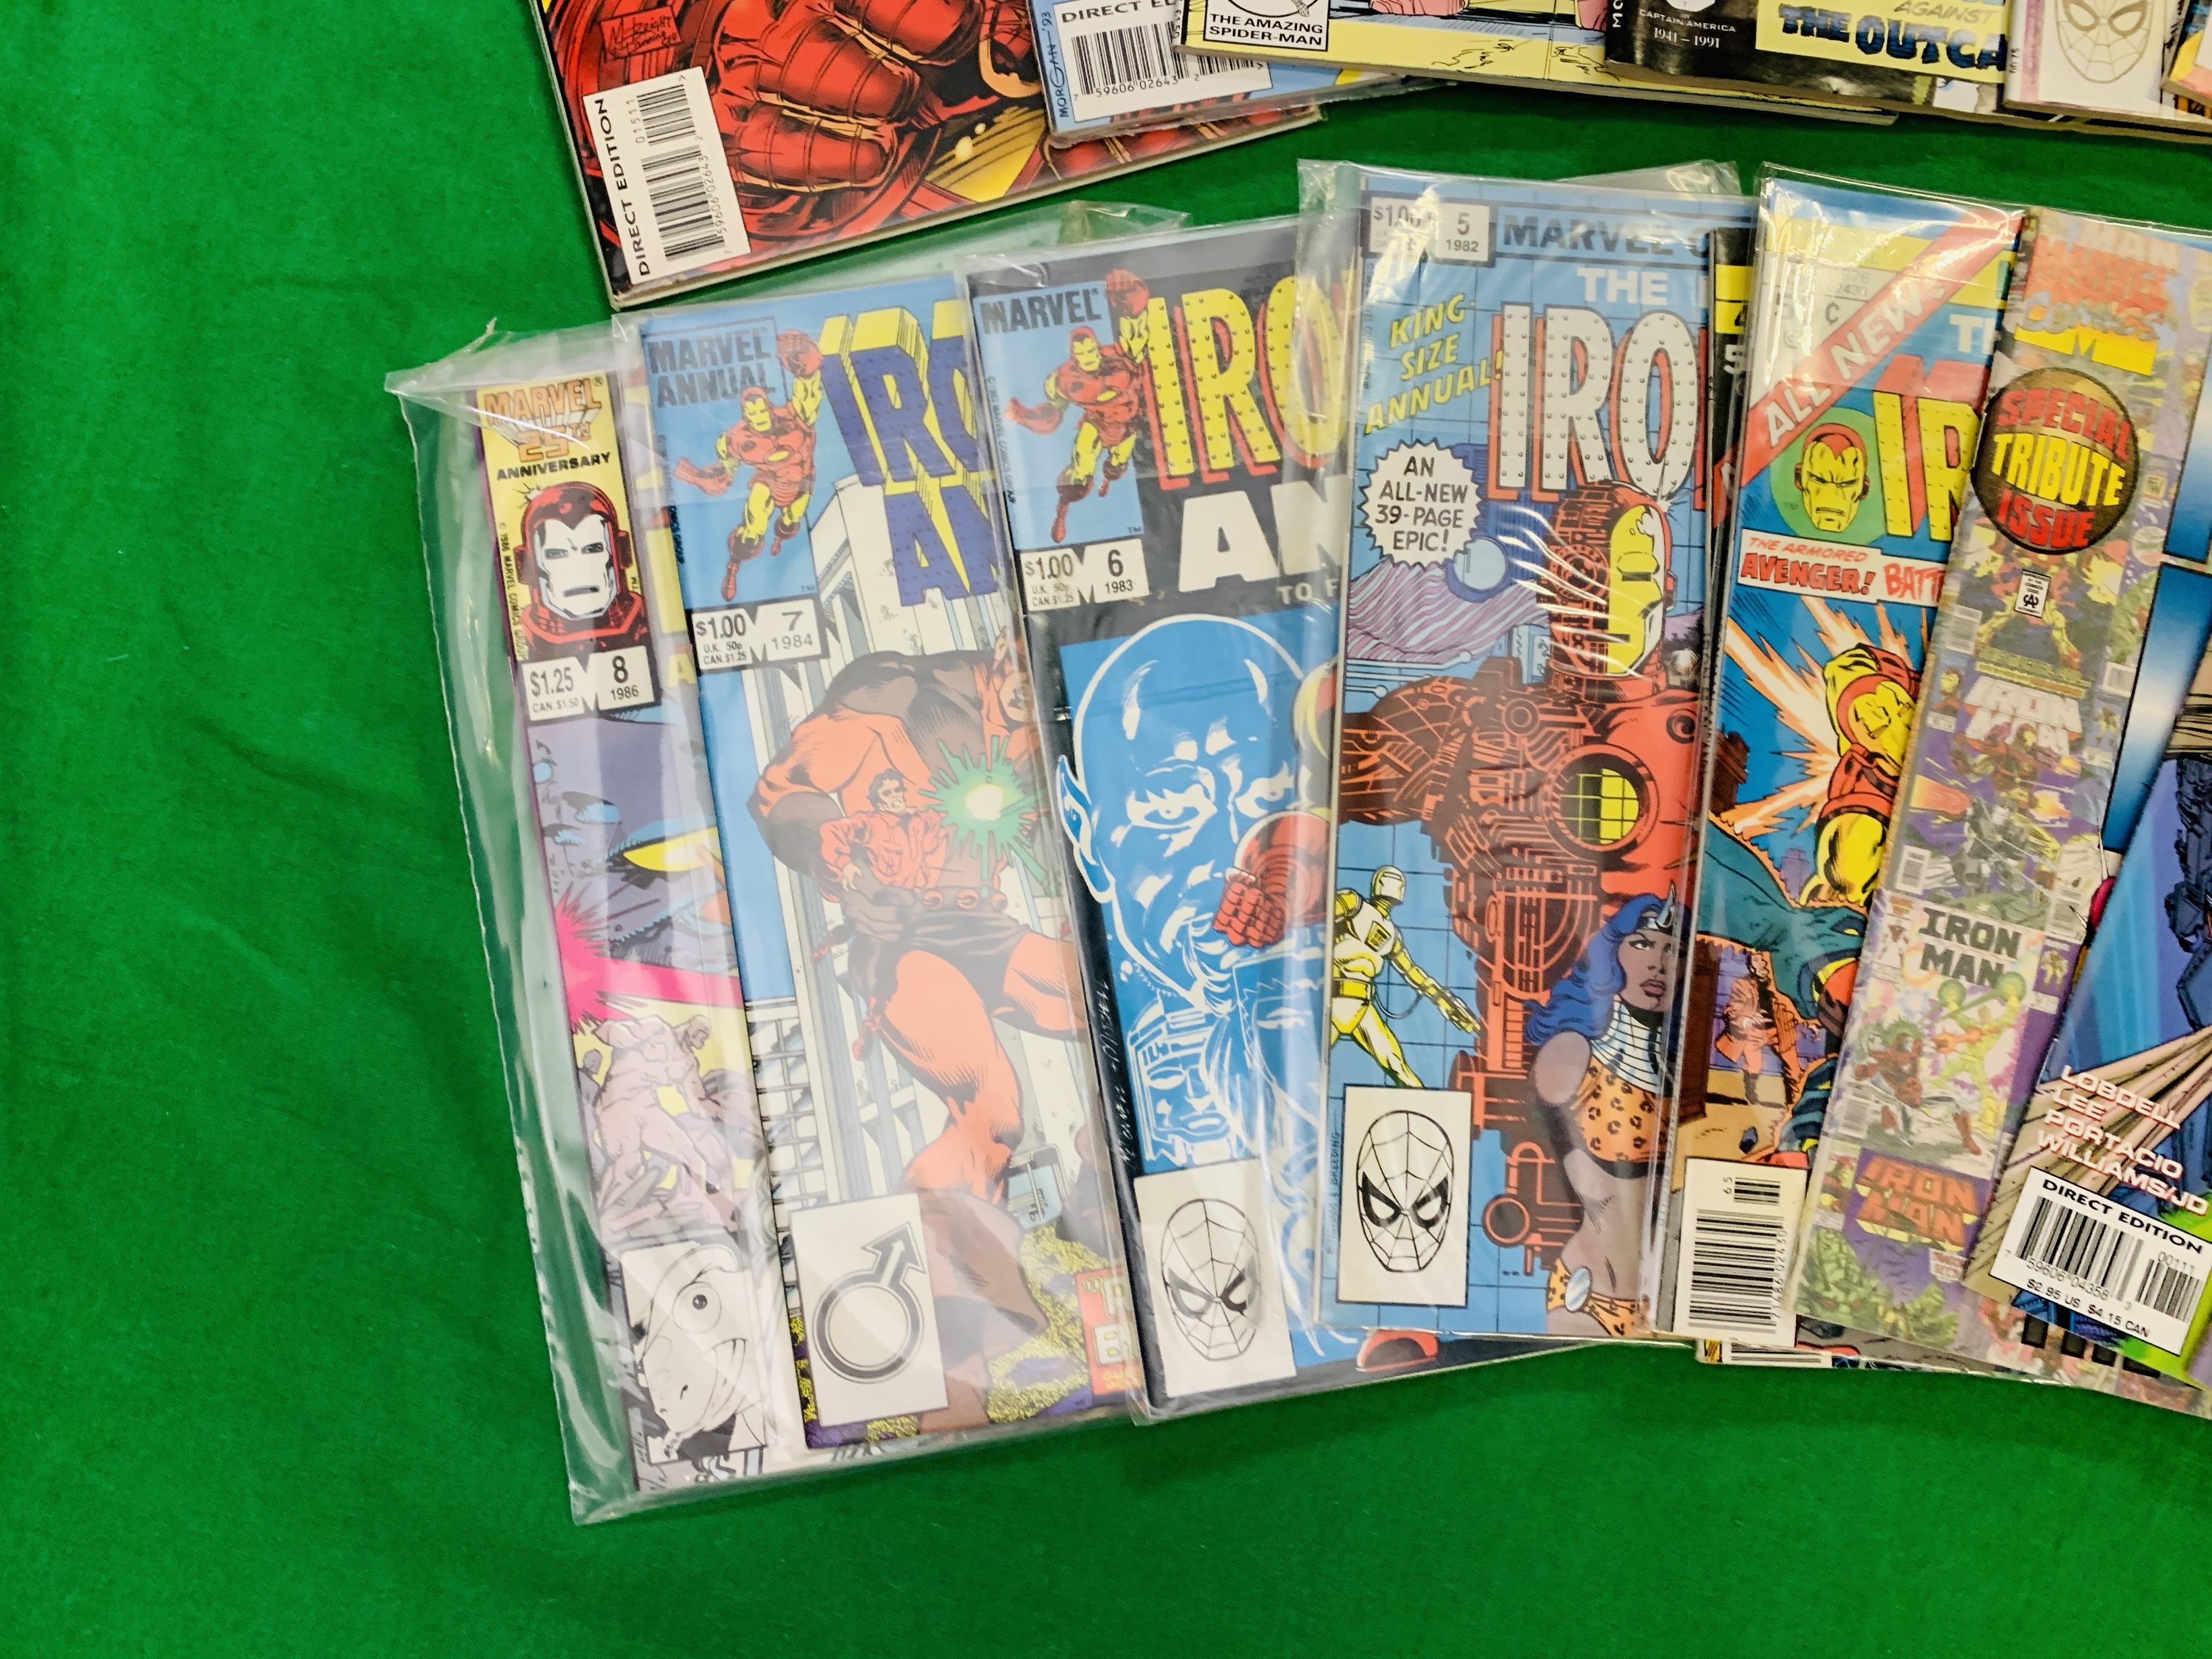 MARVEL COMICS IRONMAN KING SIZE ANNUALS NO. 3 - 15 FROM 1976 PLUS OTHER IRONMAN APPEARANCES. - Image 4 of 6